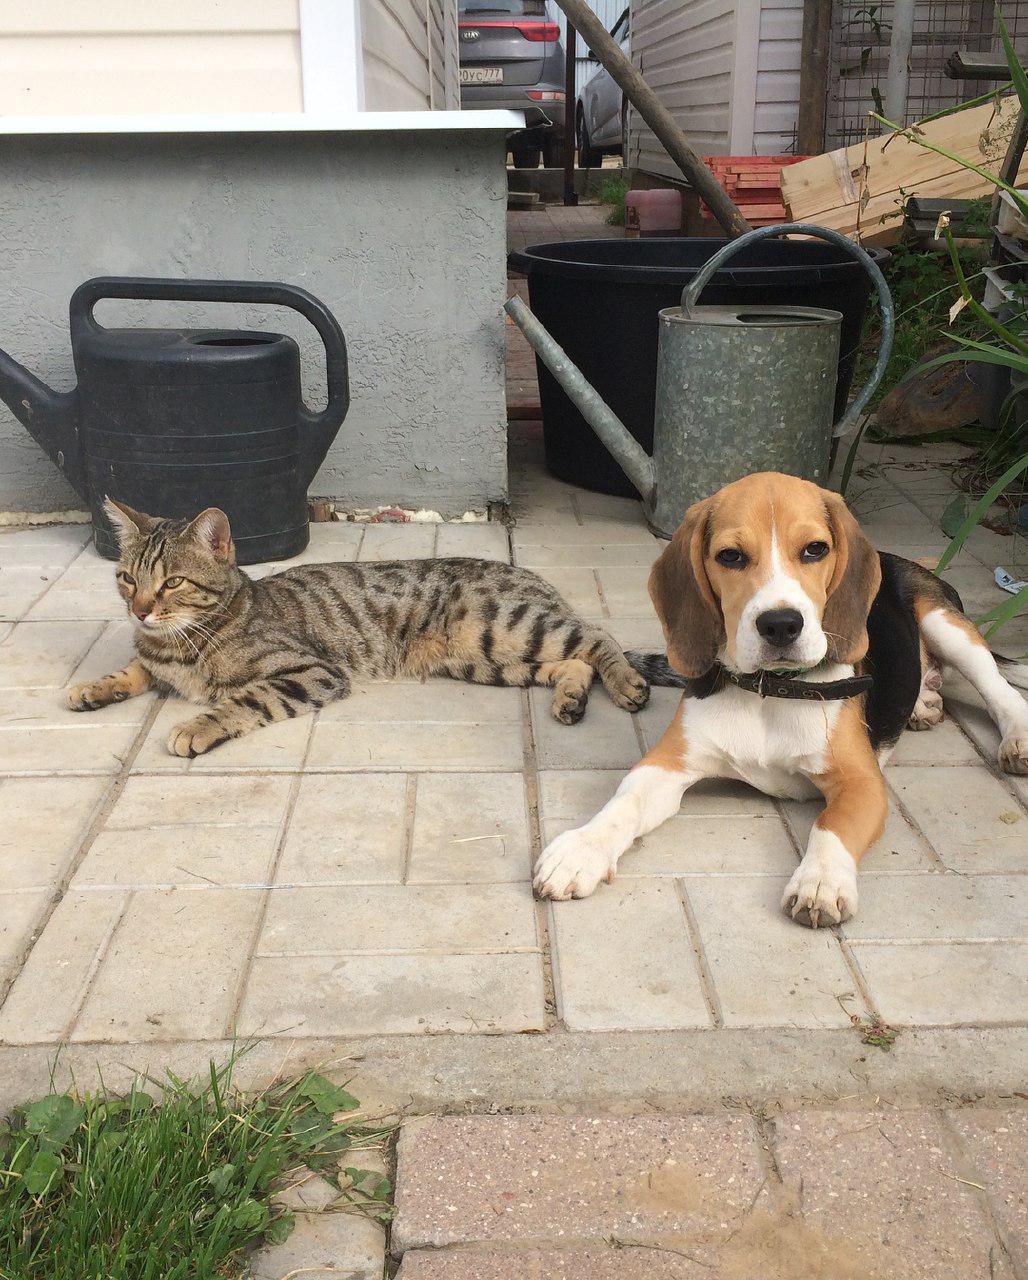 Beagle lying down on the pavement next to a cat